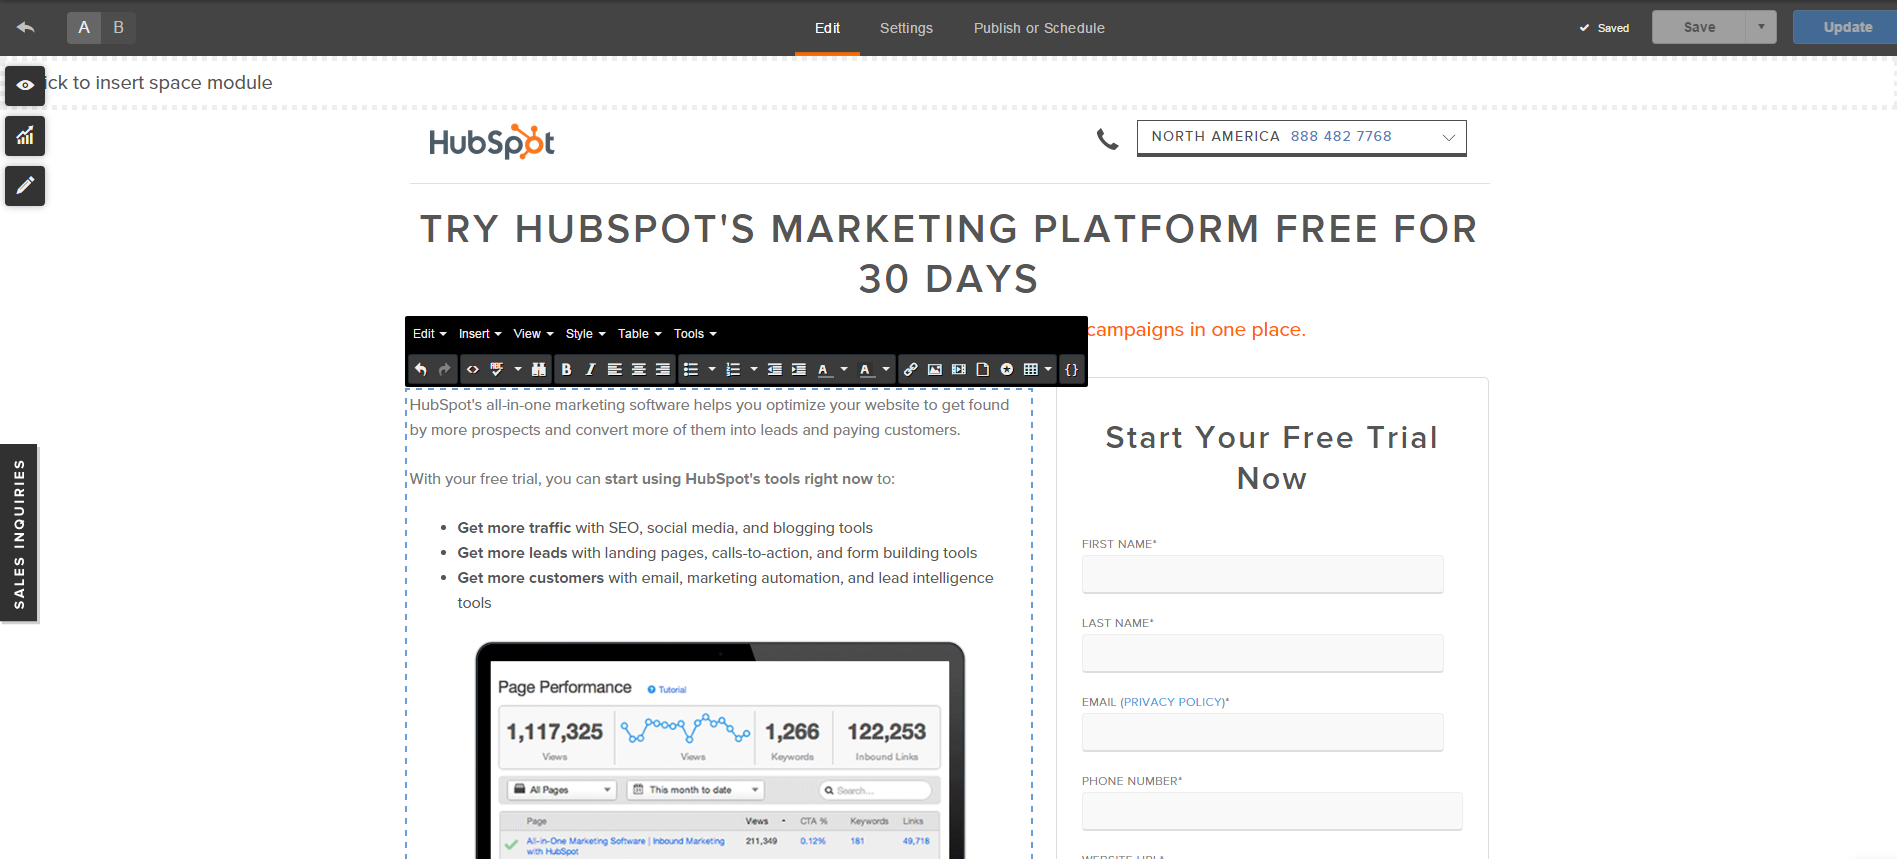 Website and Landing Page content editor via hubspot.png